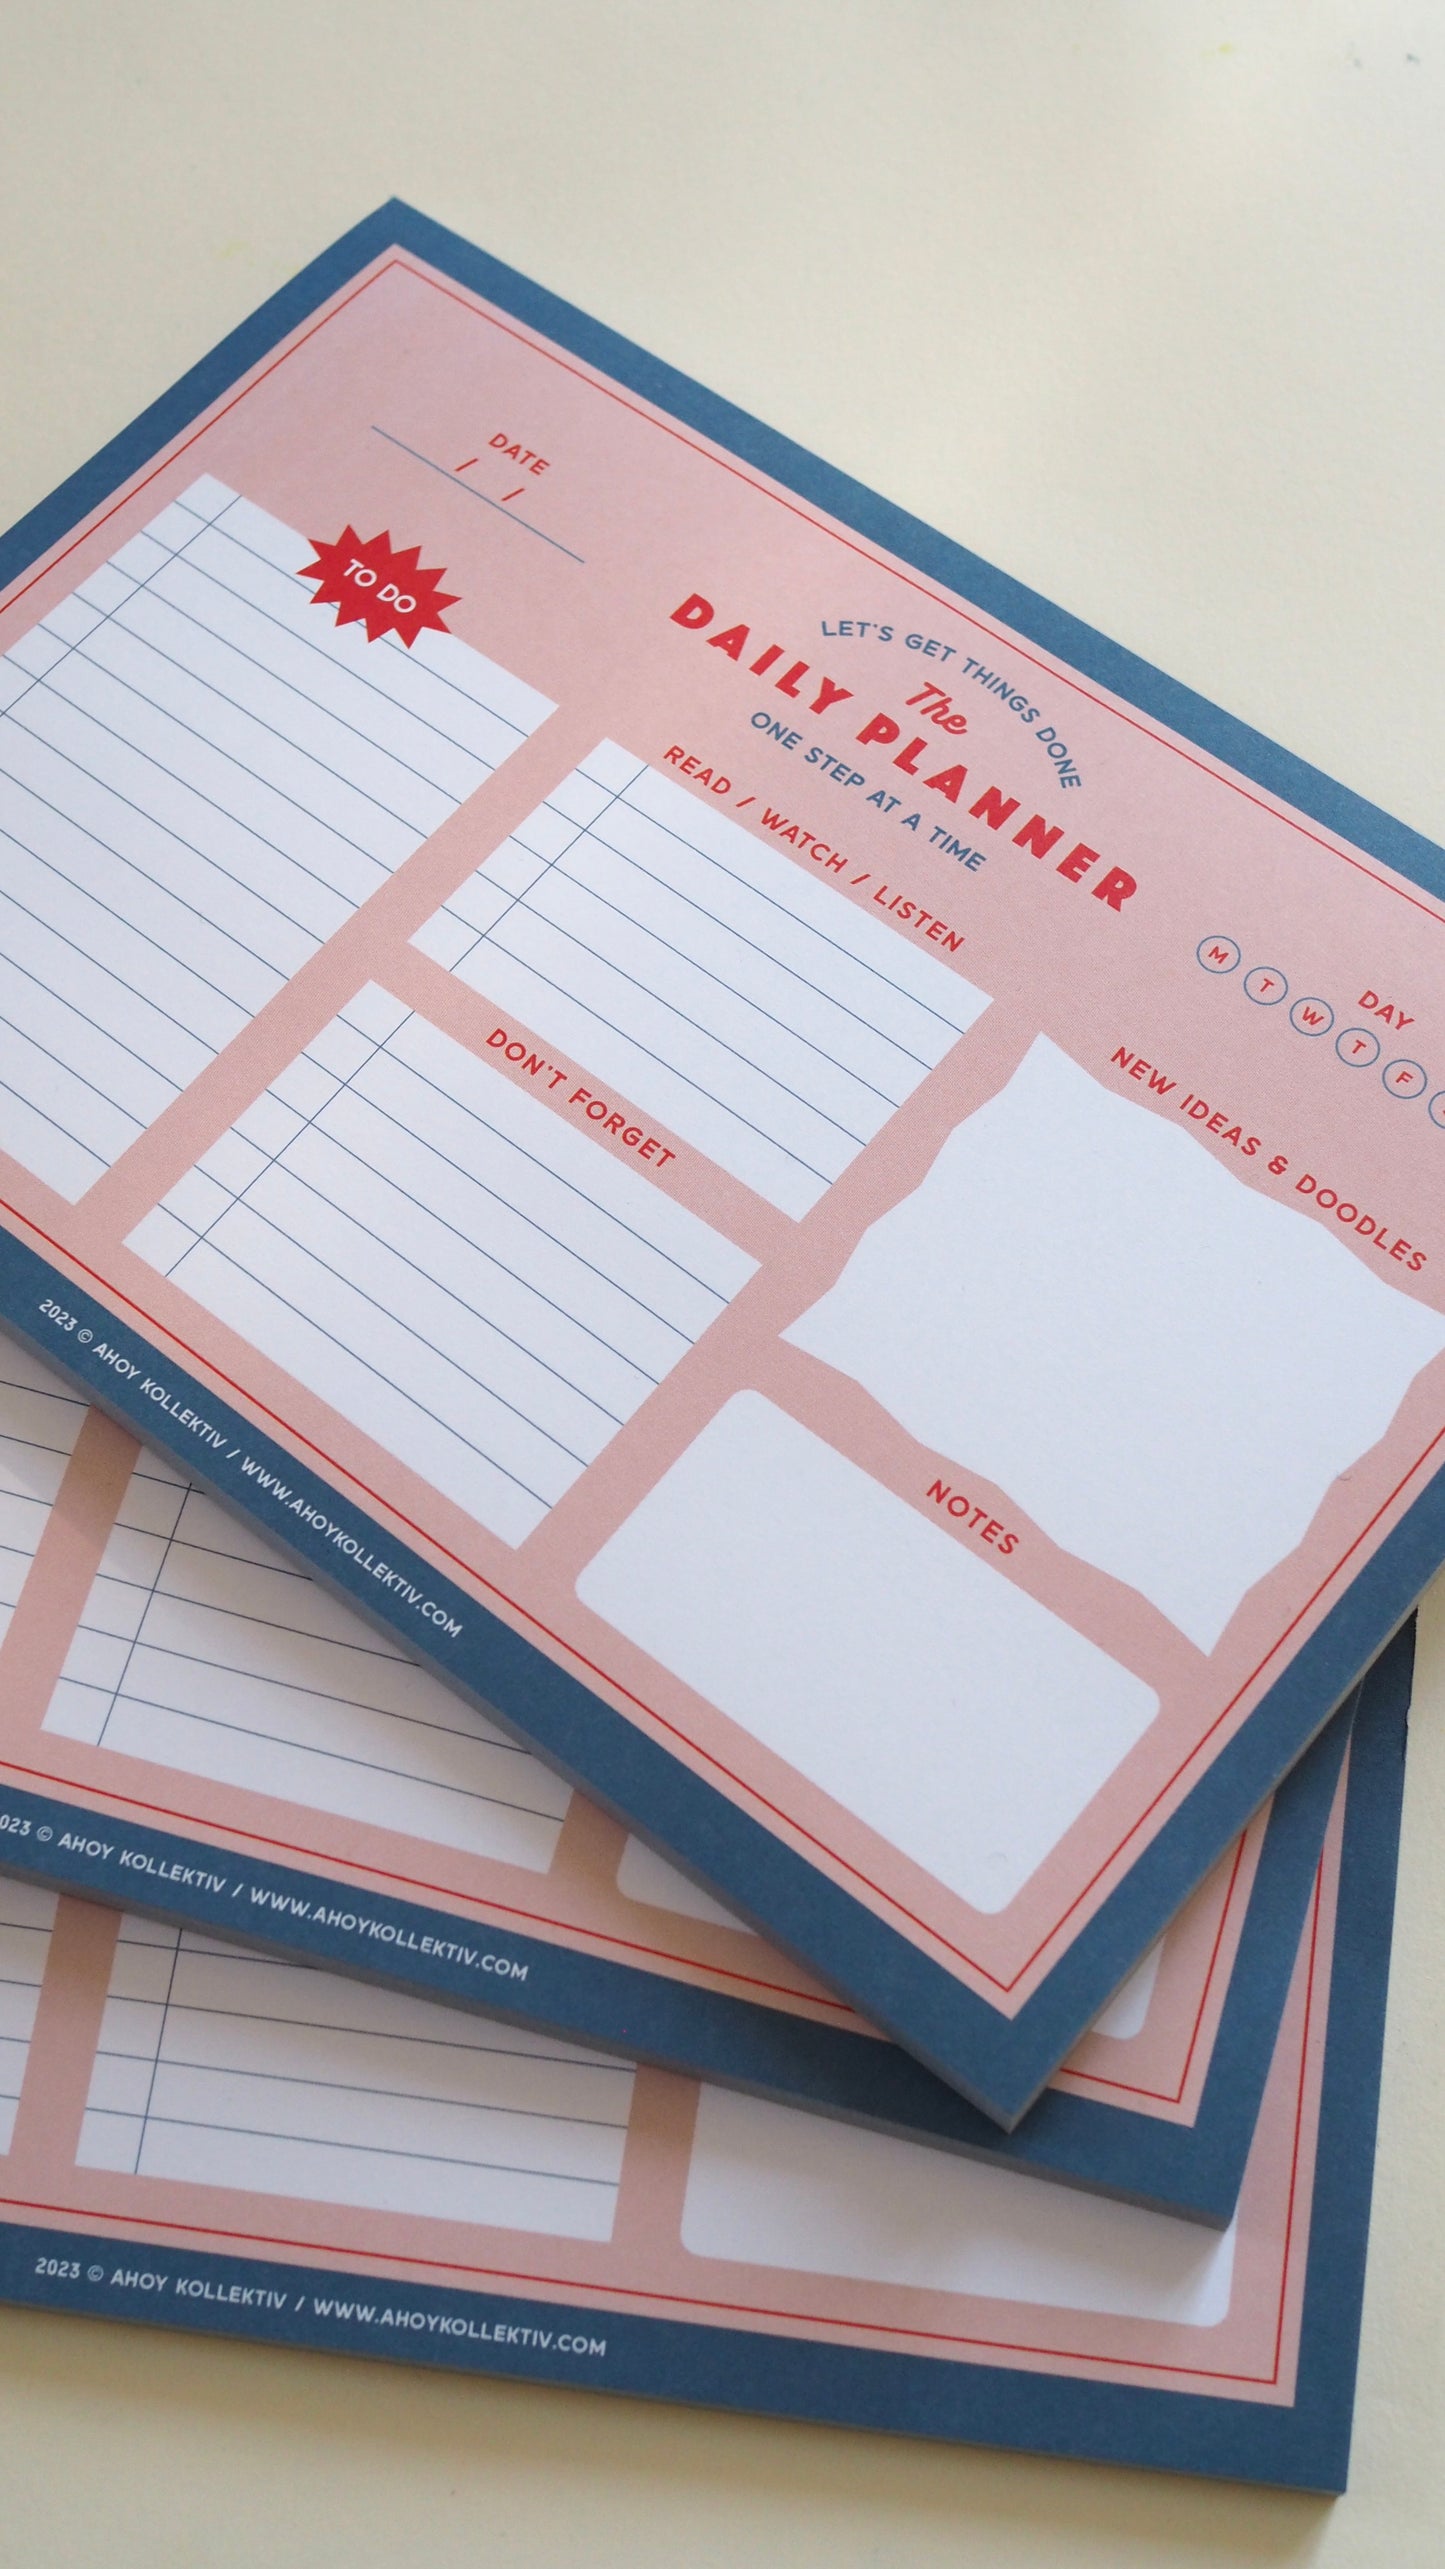 The Daily Planner - A5 desk notepad